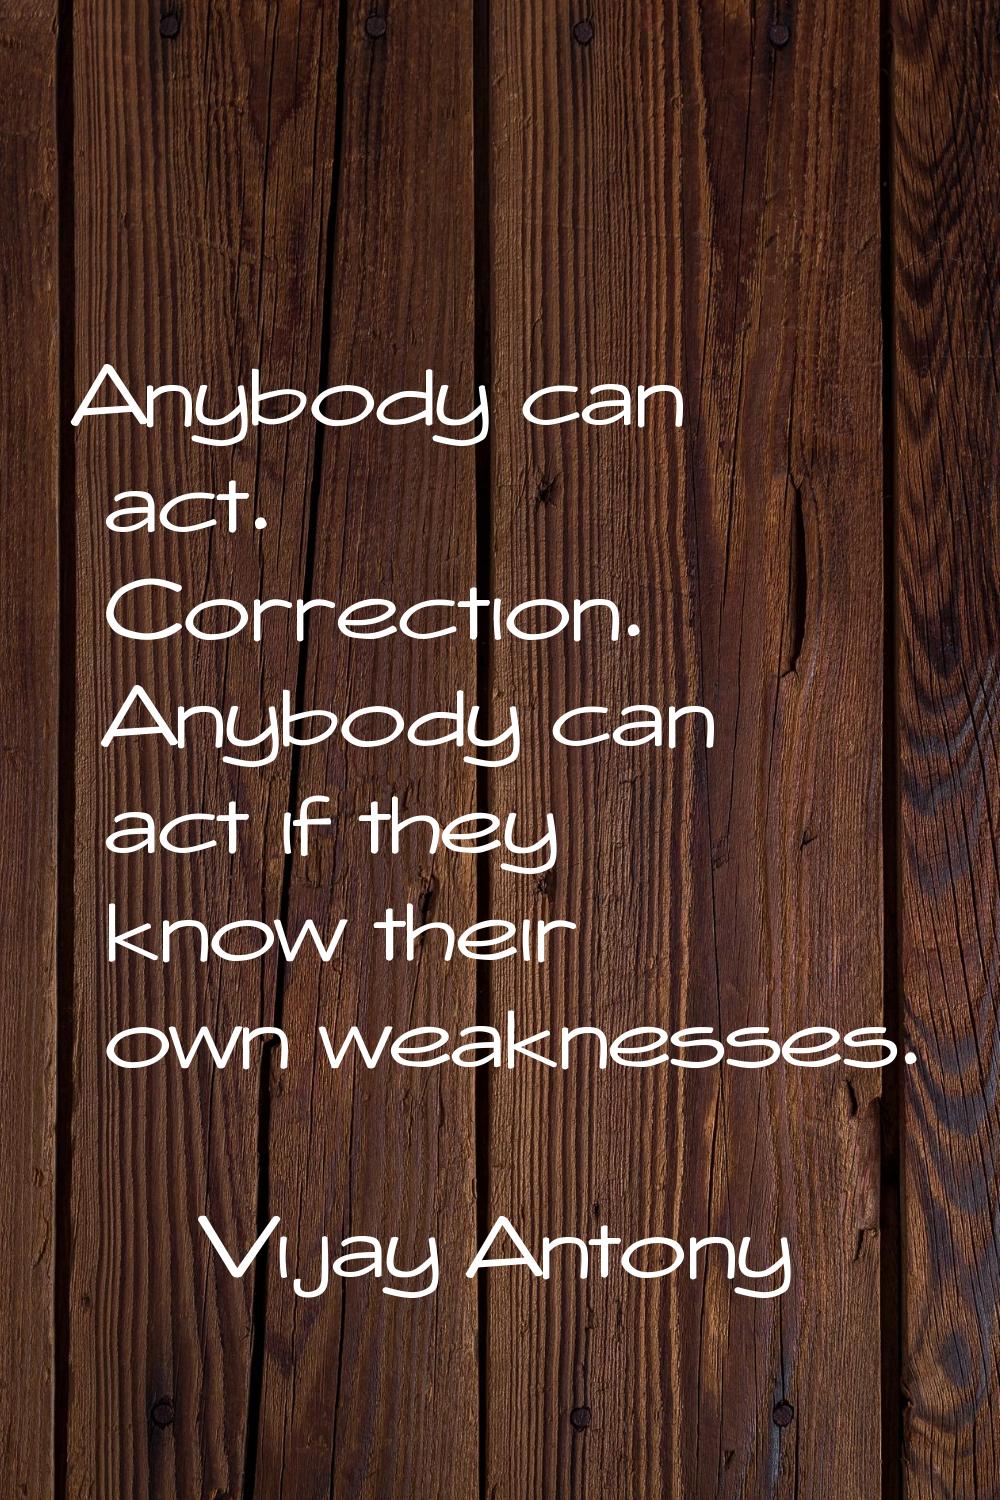 Anybody can act. Correction. Anybody can act if they know their own weaknesses.